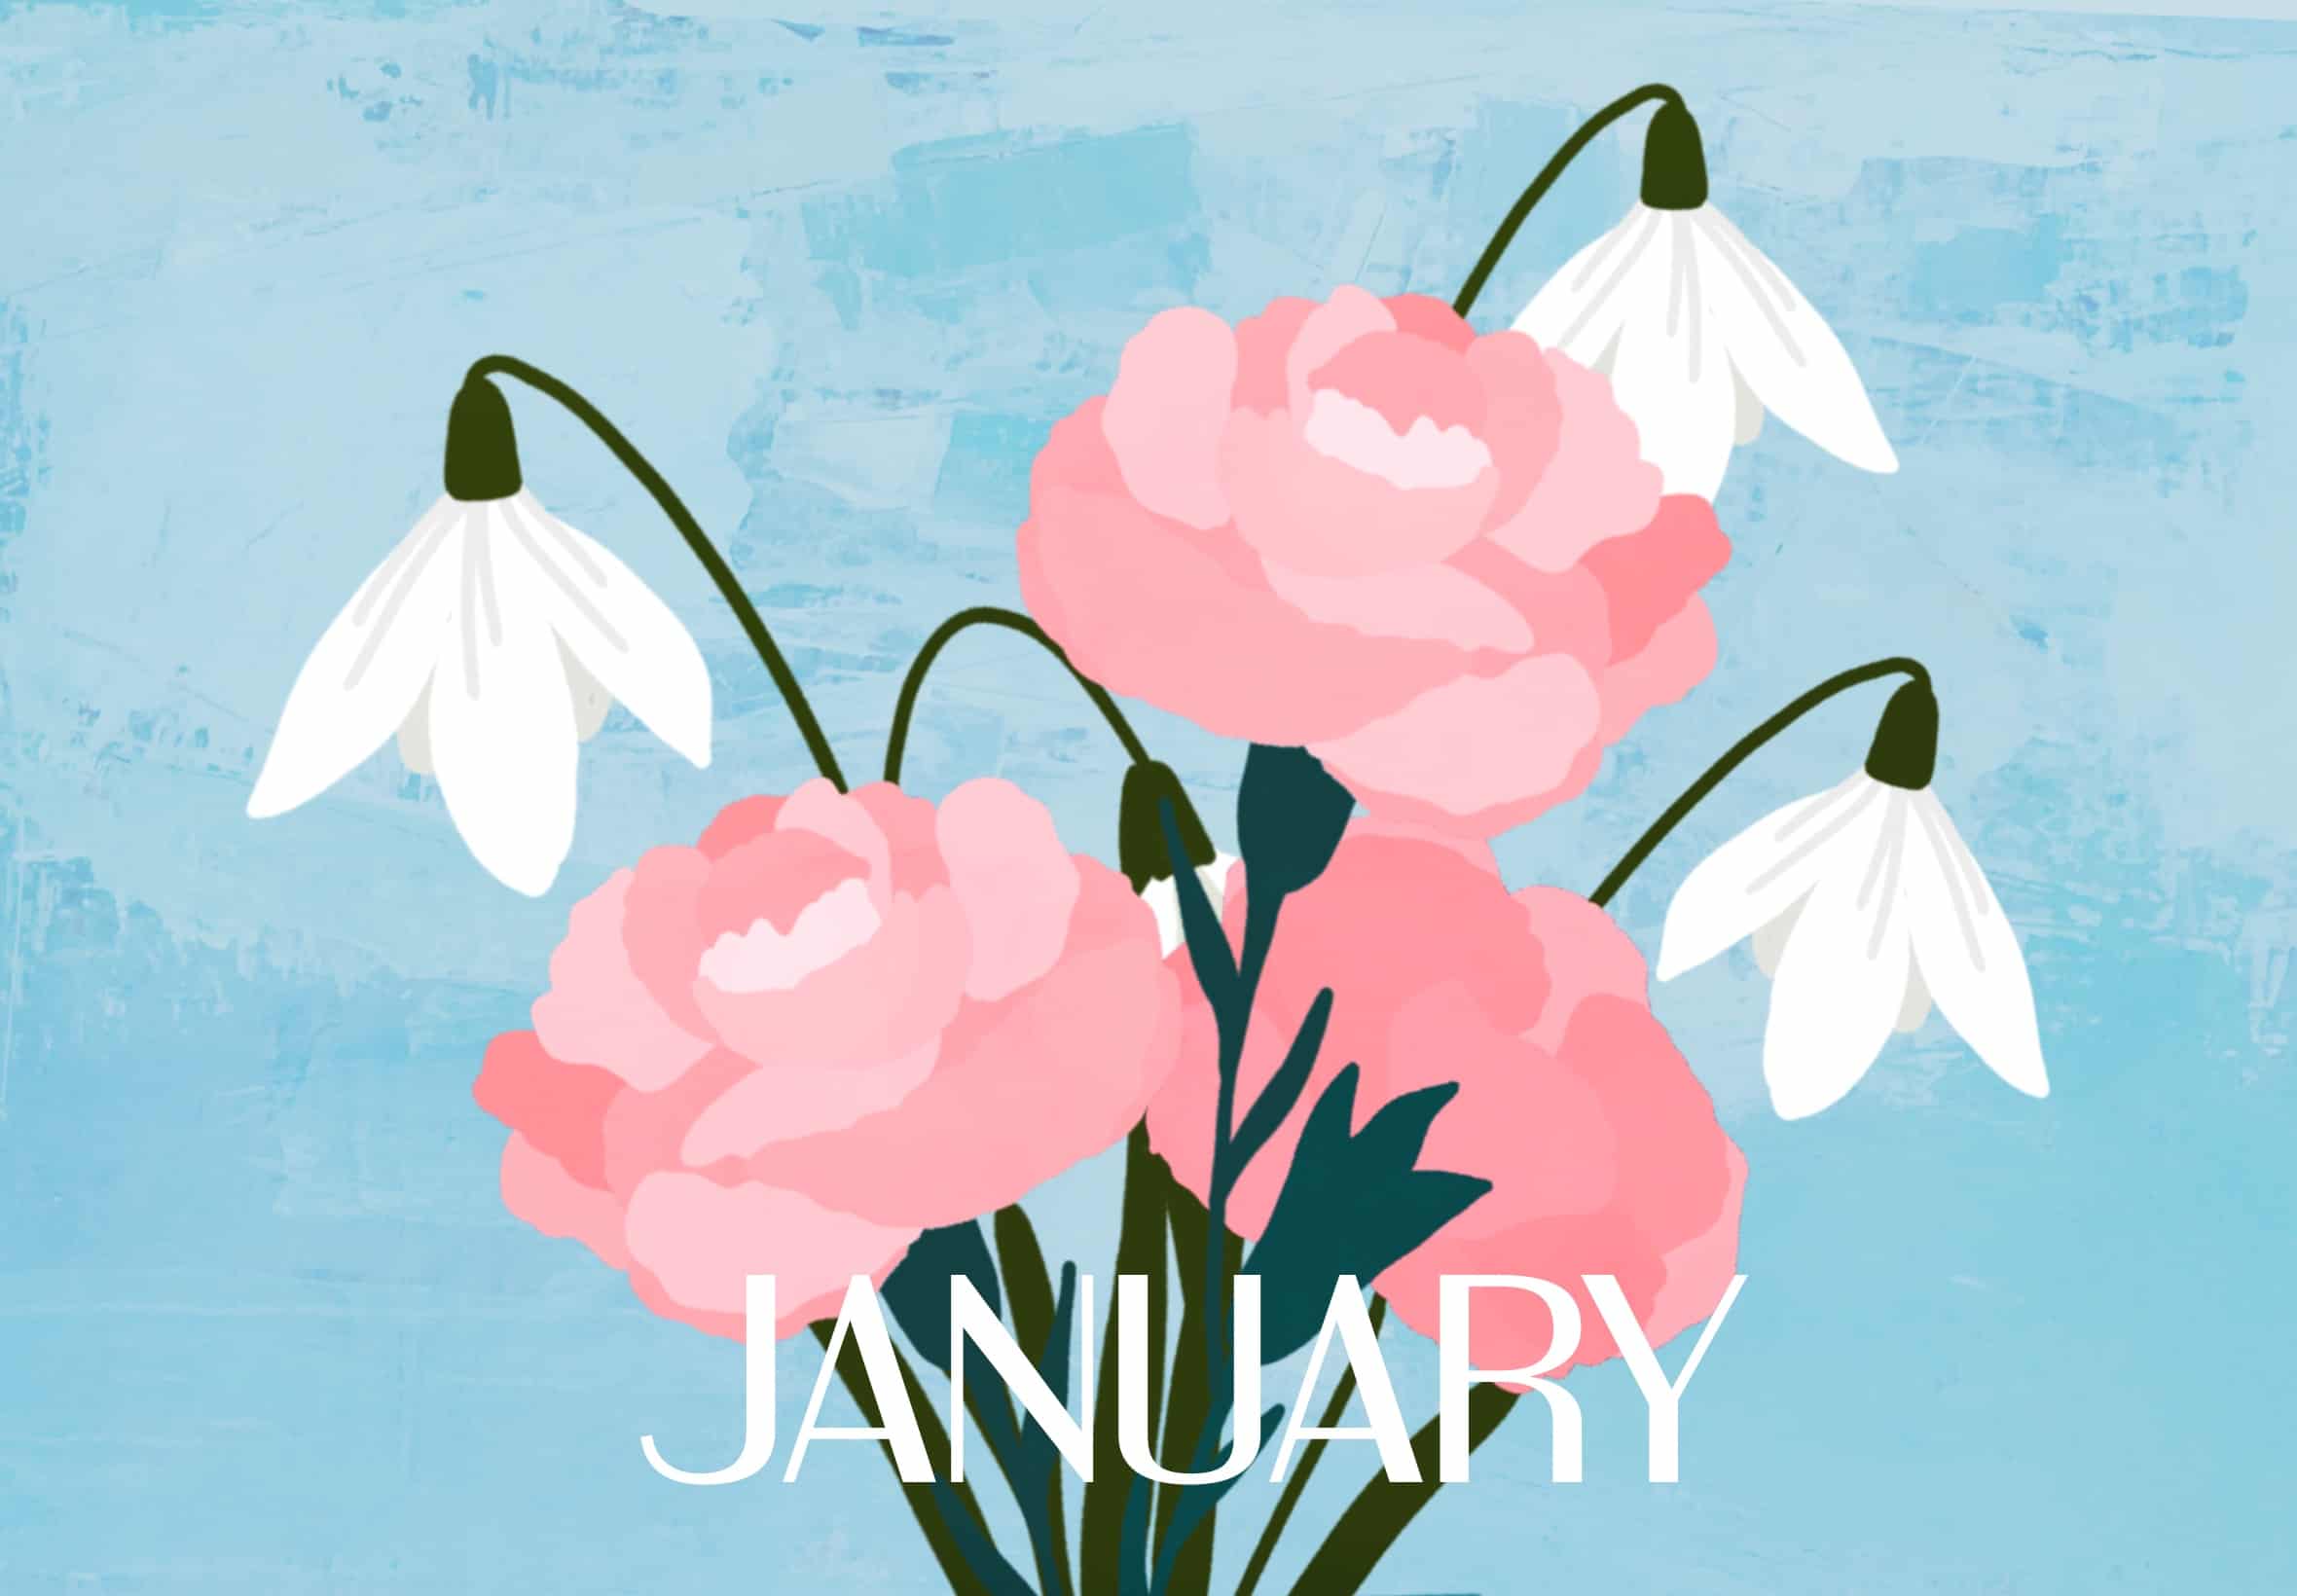 January Birth Month Flowers - Carnation and Snowdrop